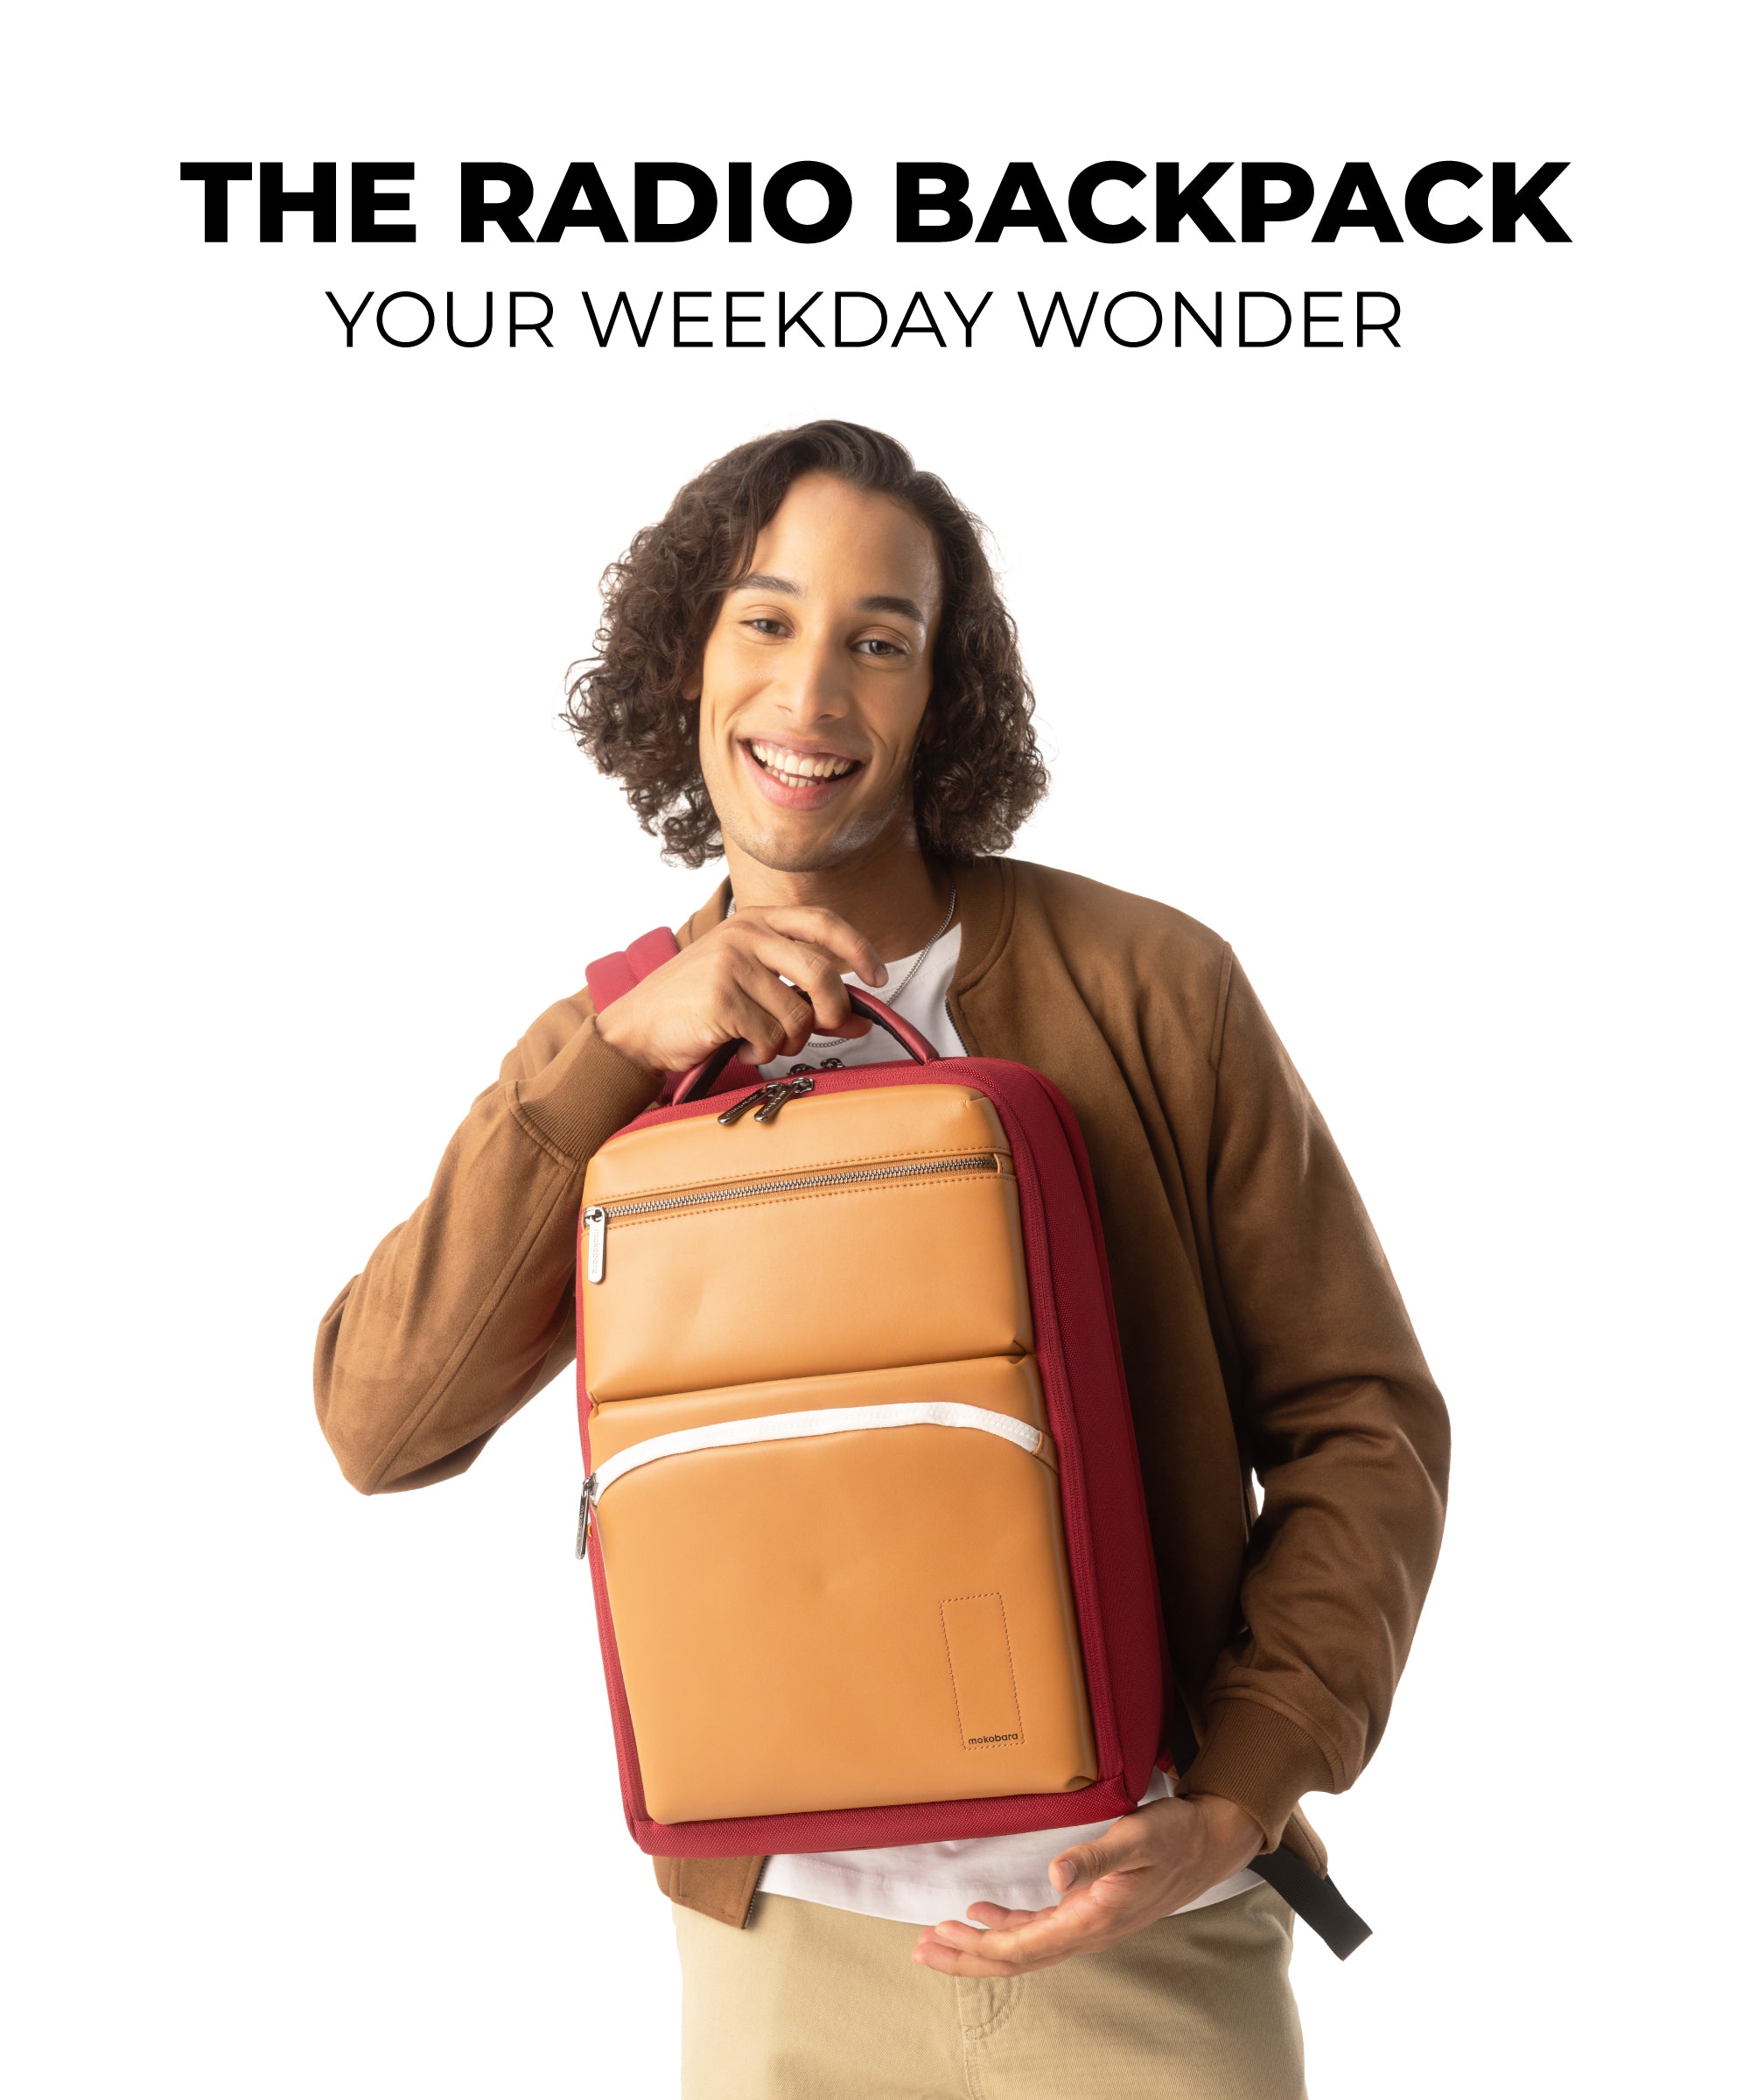 Color_Fire Alarm 2.0 | The Radio Backpack